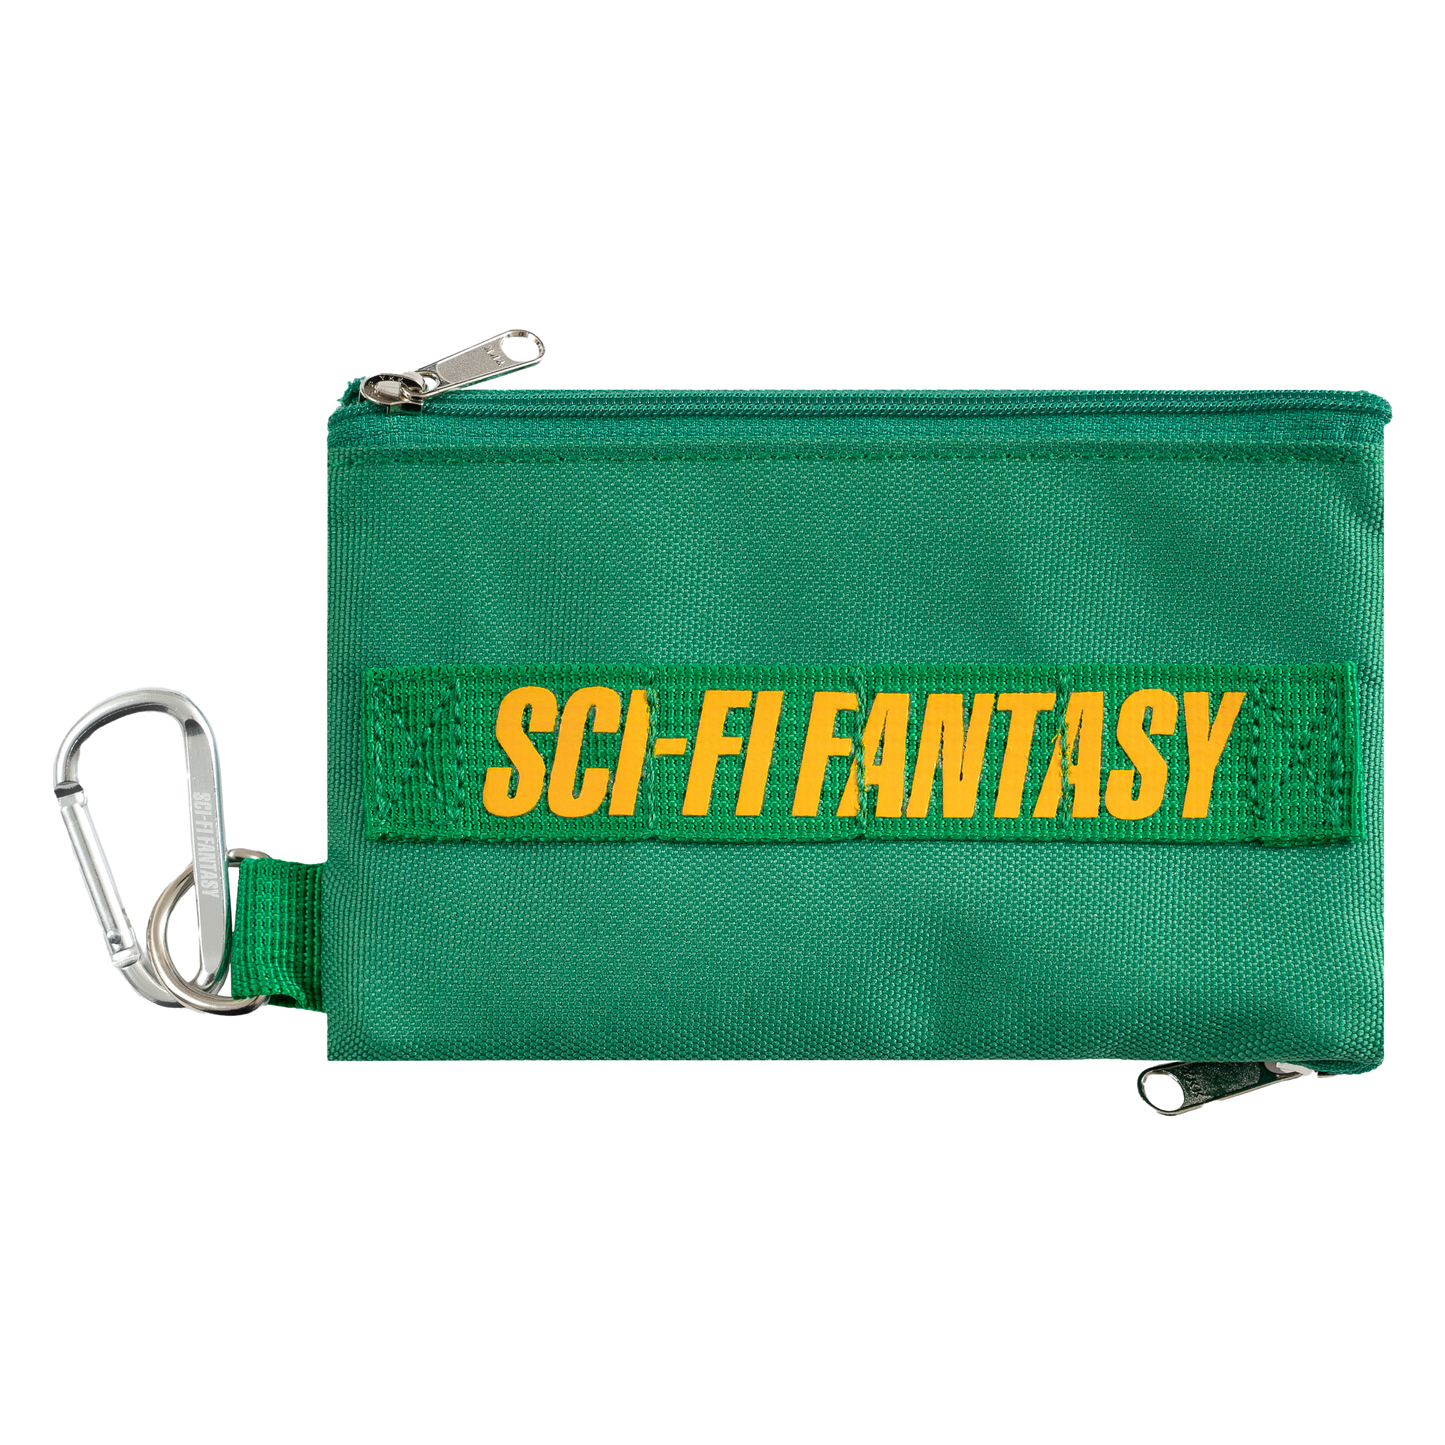 SCI-FI FANTASY - Carry All Pouch Green